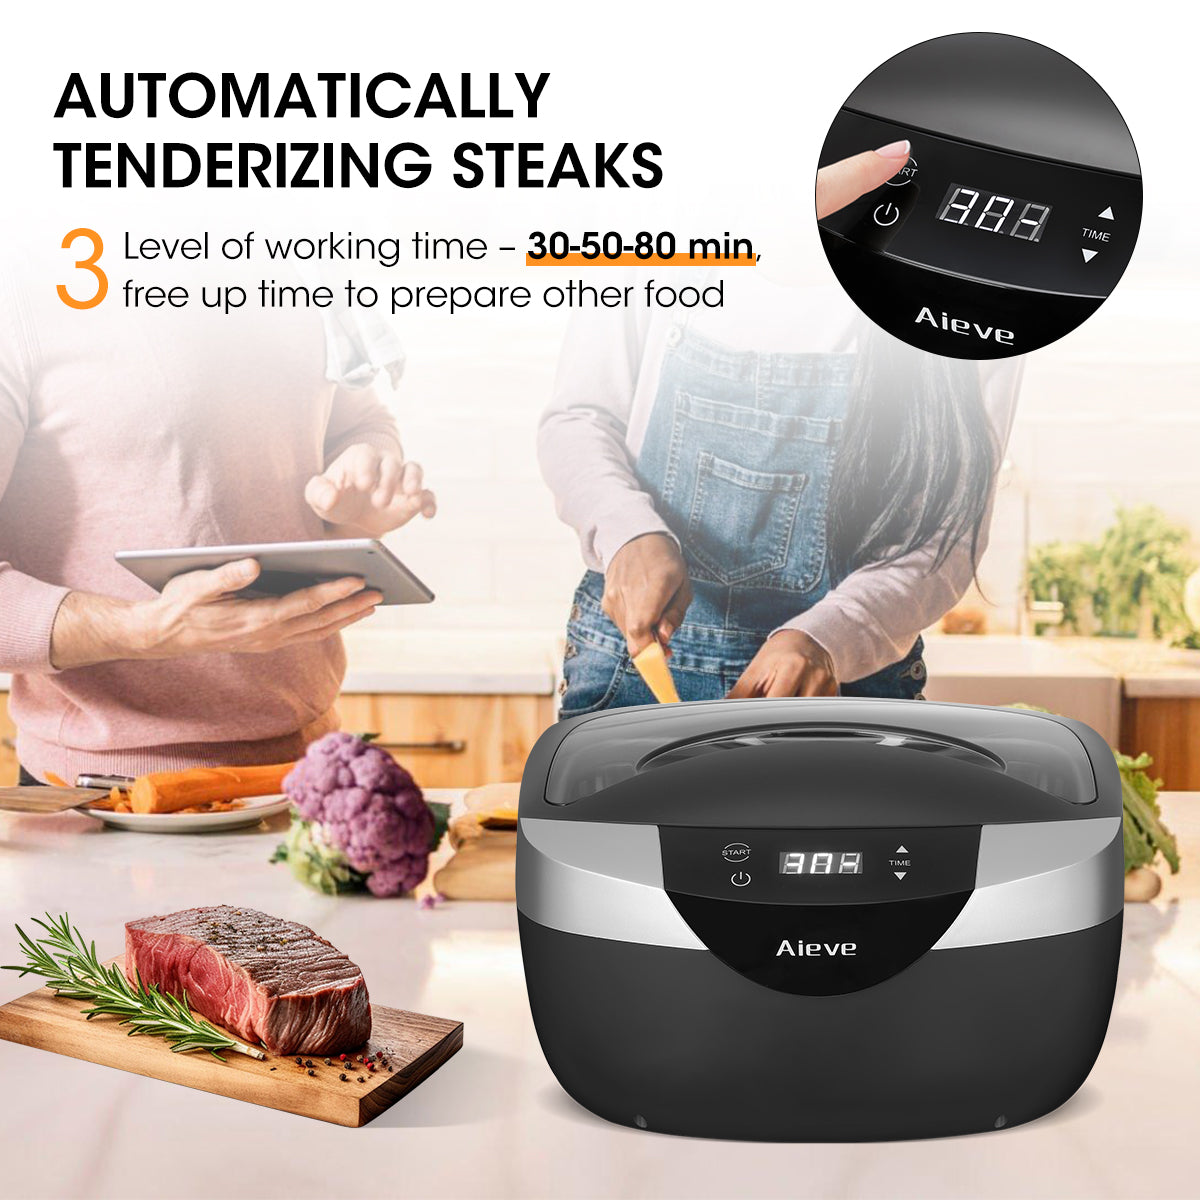 3.Automatically Tenderizing Steaks 3 Level of working time – 30-50-80 min, free up time to prepare other food